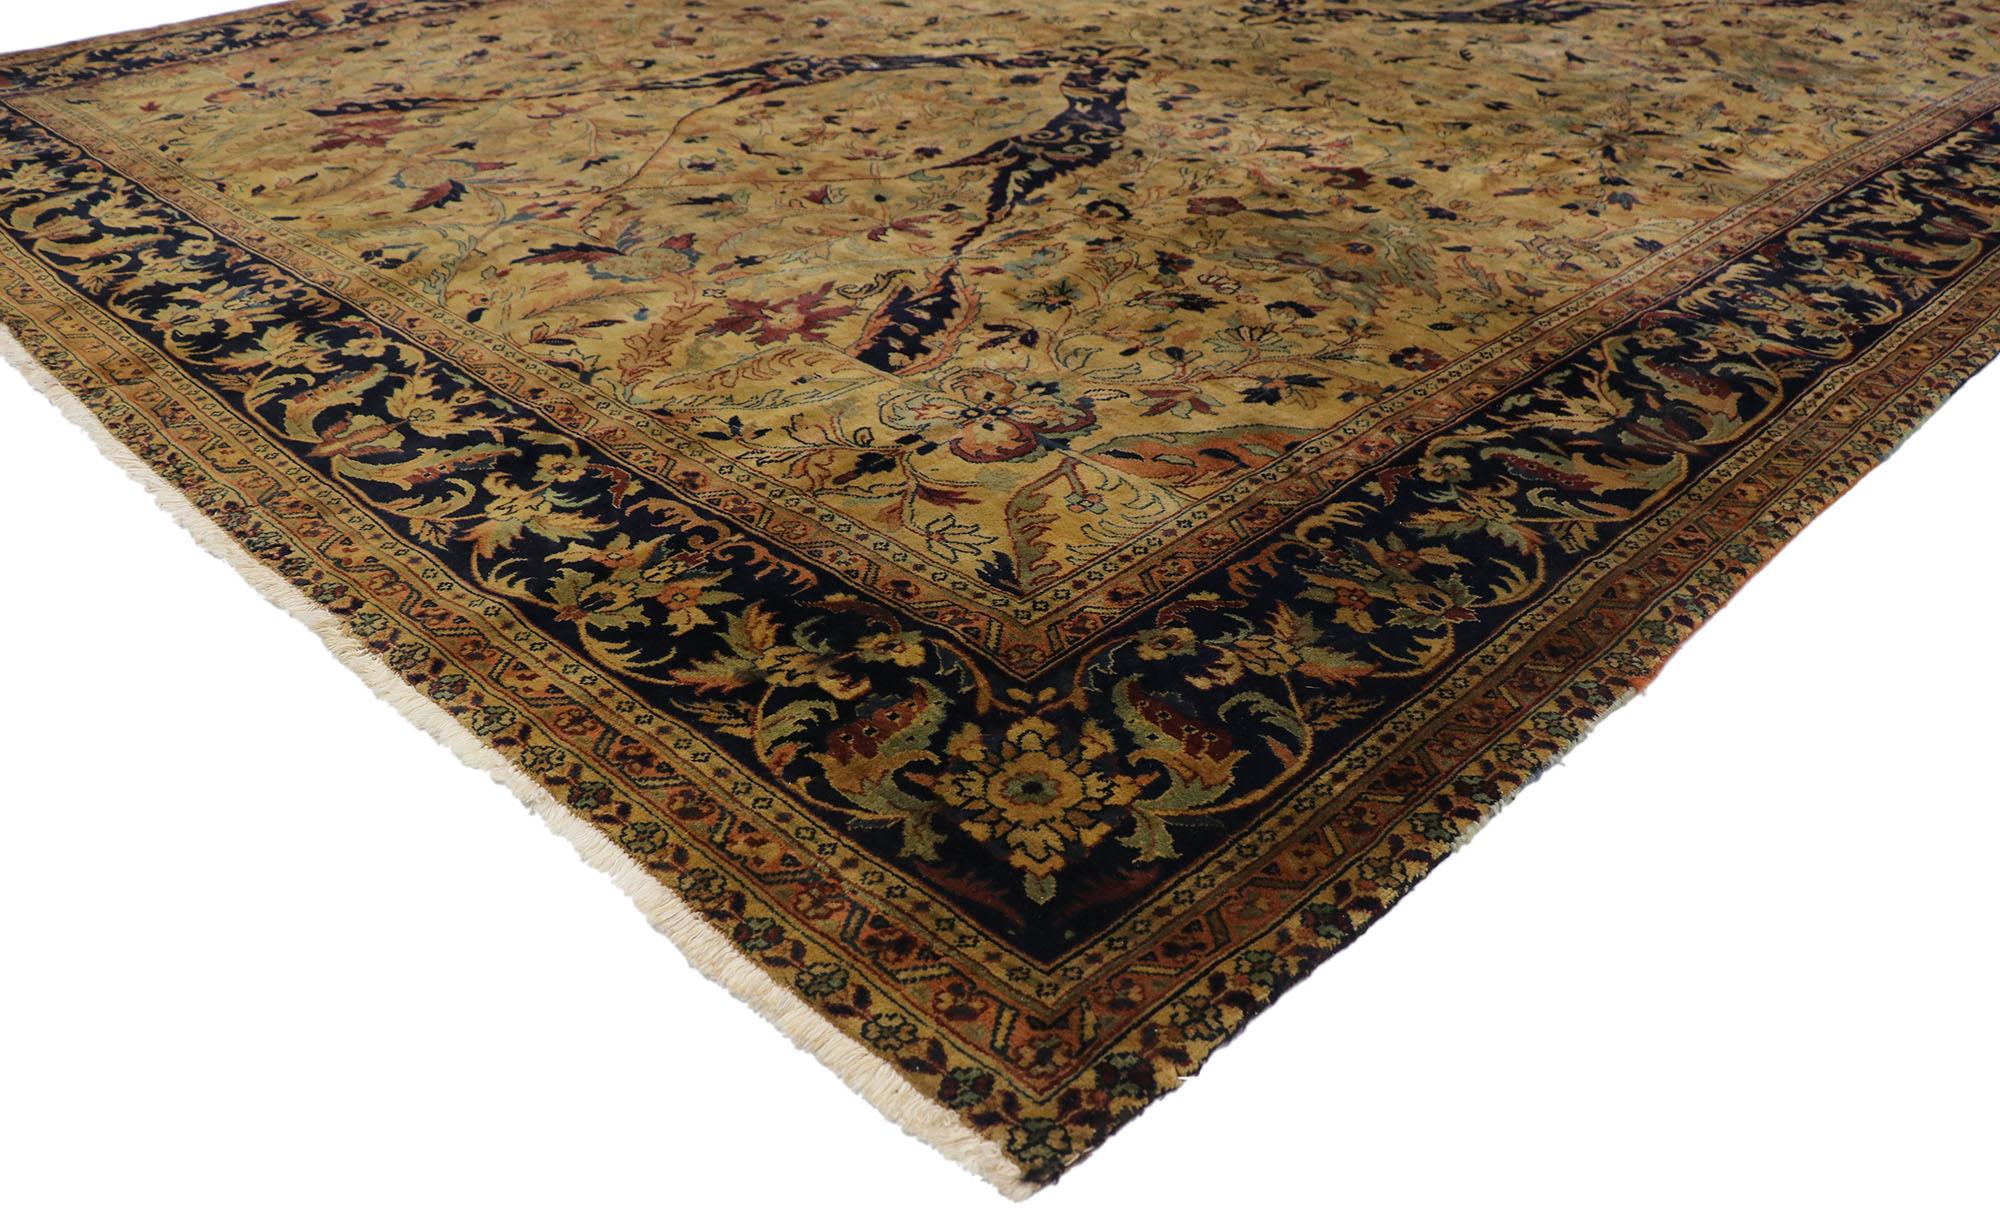 77606, vintage Indian rug with Warm Arts & Crafts style. With its timeless design and warm earth-tone colors, this hand-knotted wool vintage Indian rug astounds with its beauty. It features an all-over botanical lattice pattern composed of blooming